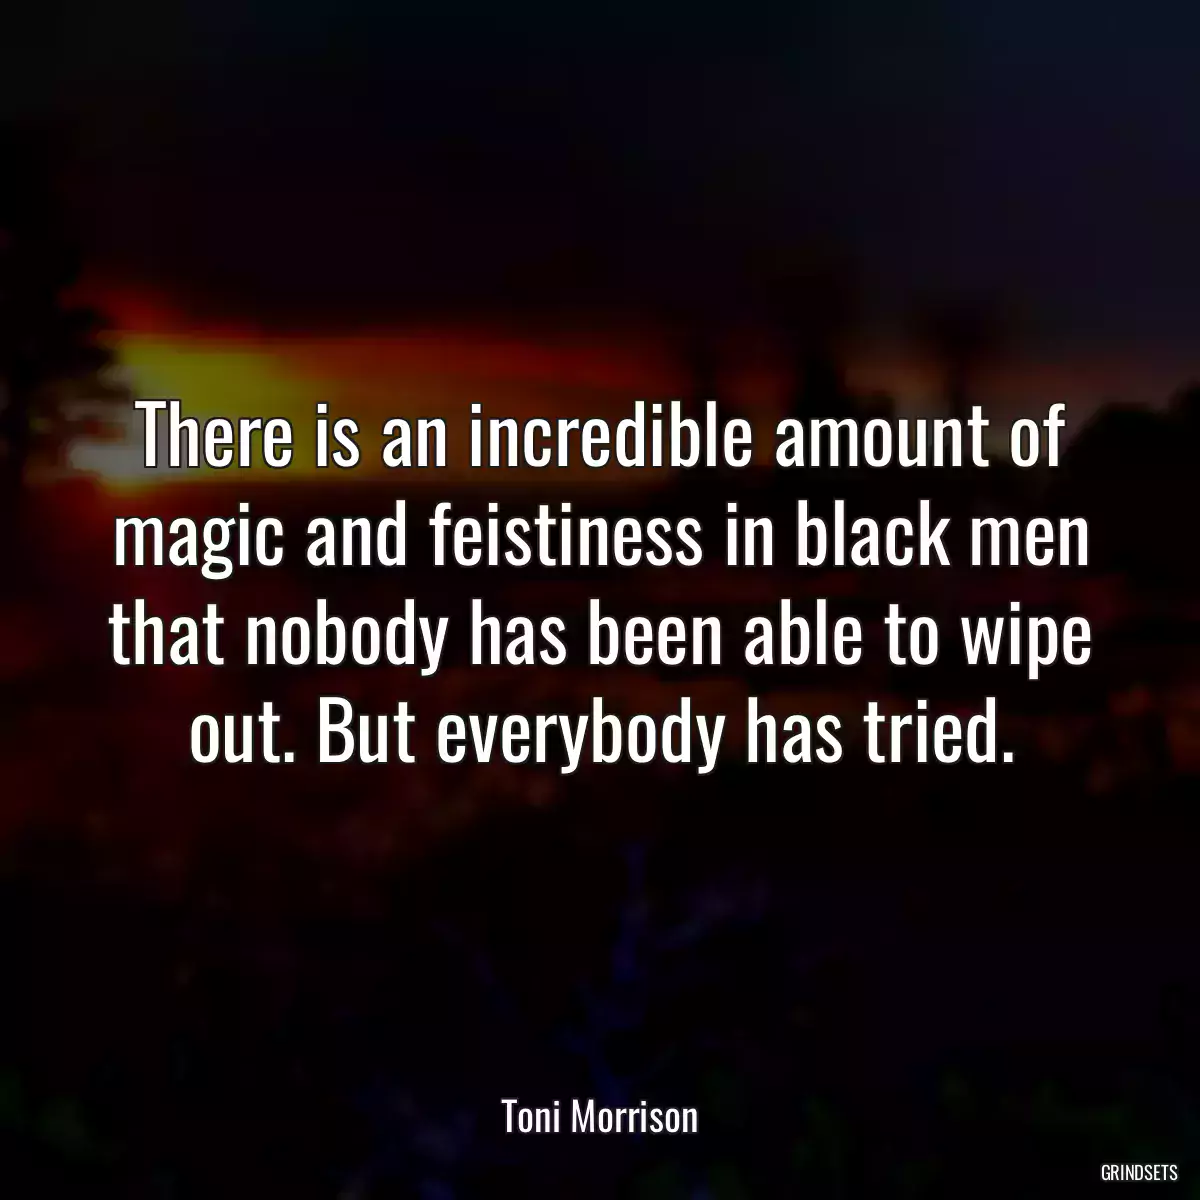 There is an incredible amount of magic and feistiness in black men that nobody has been able to wipe out. But everybody has tried.